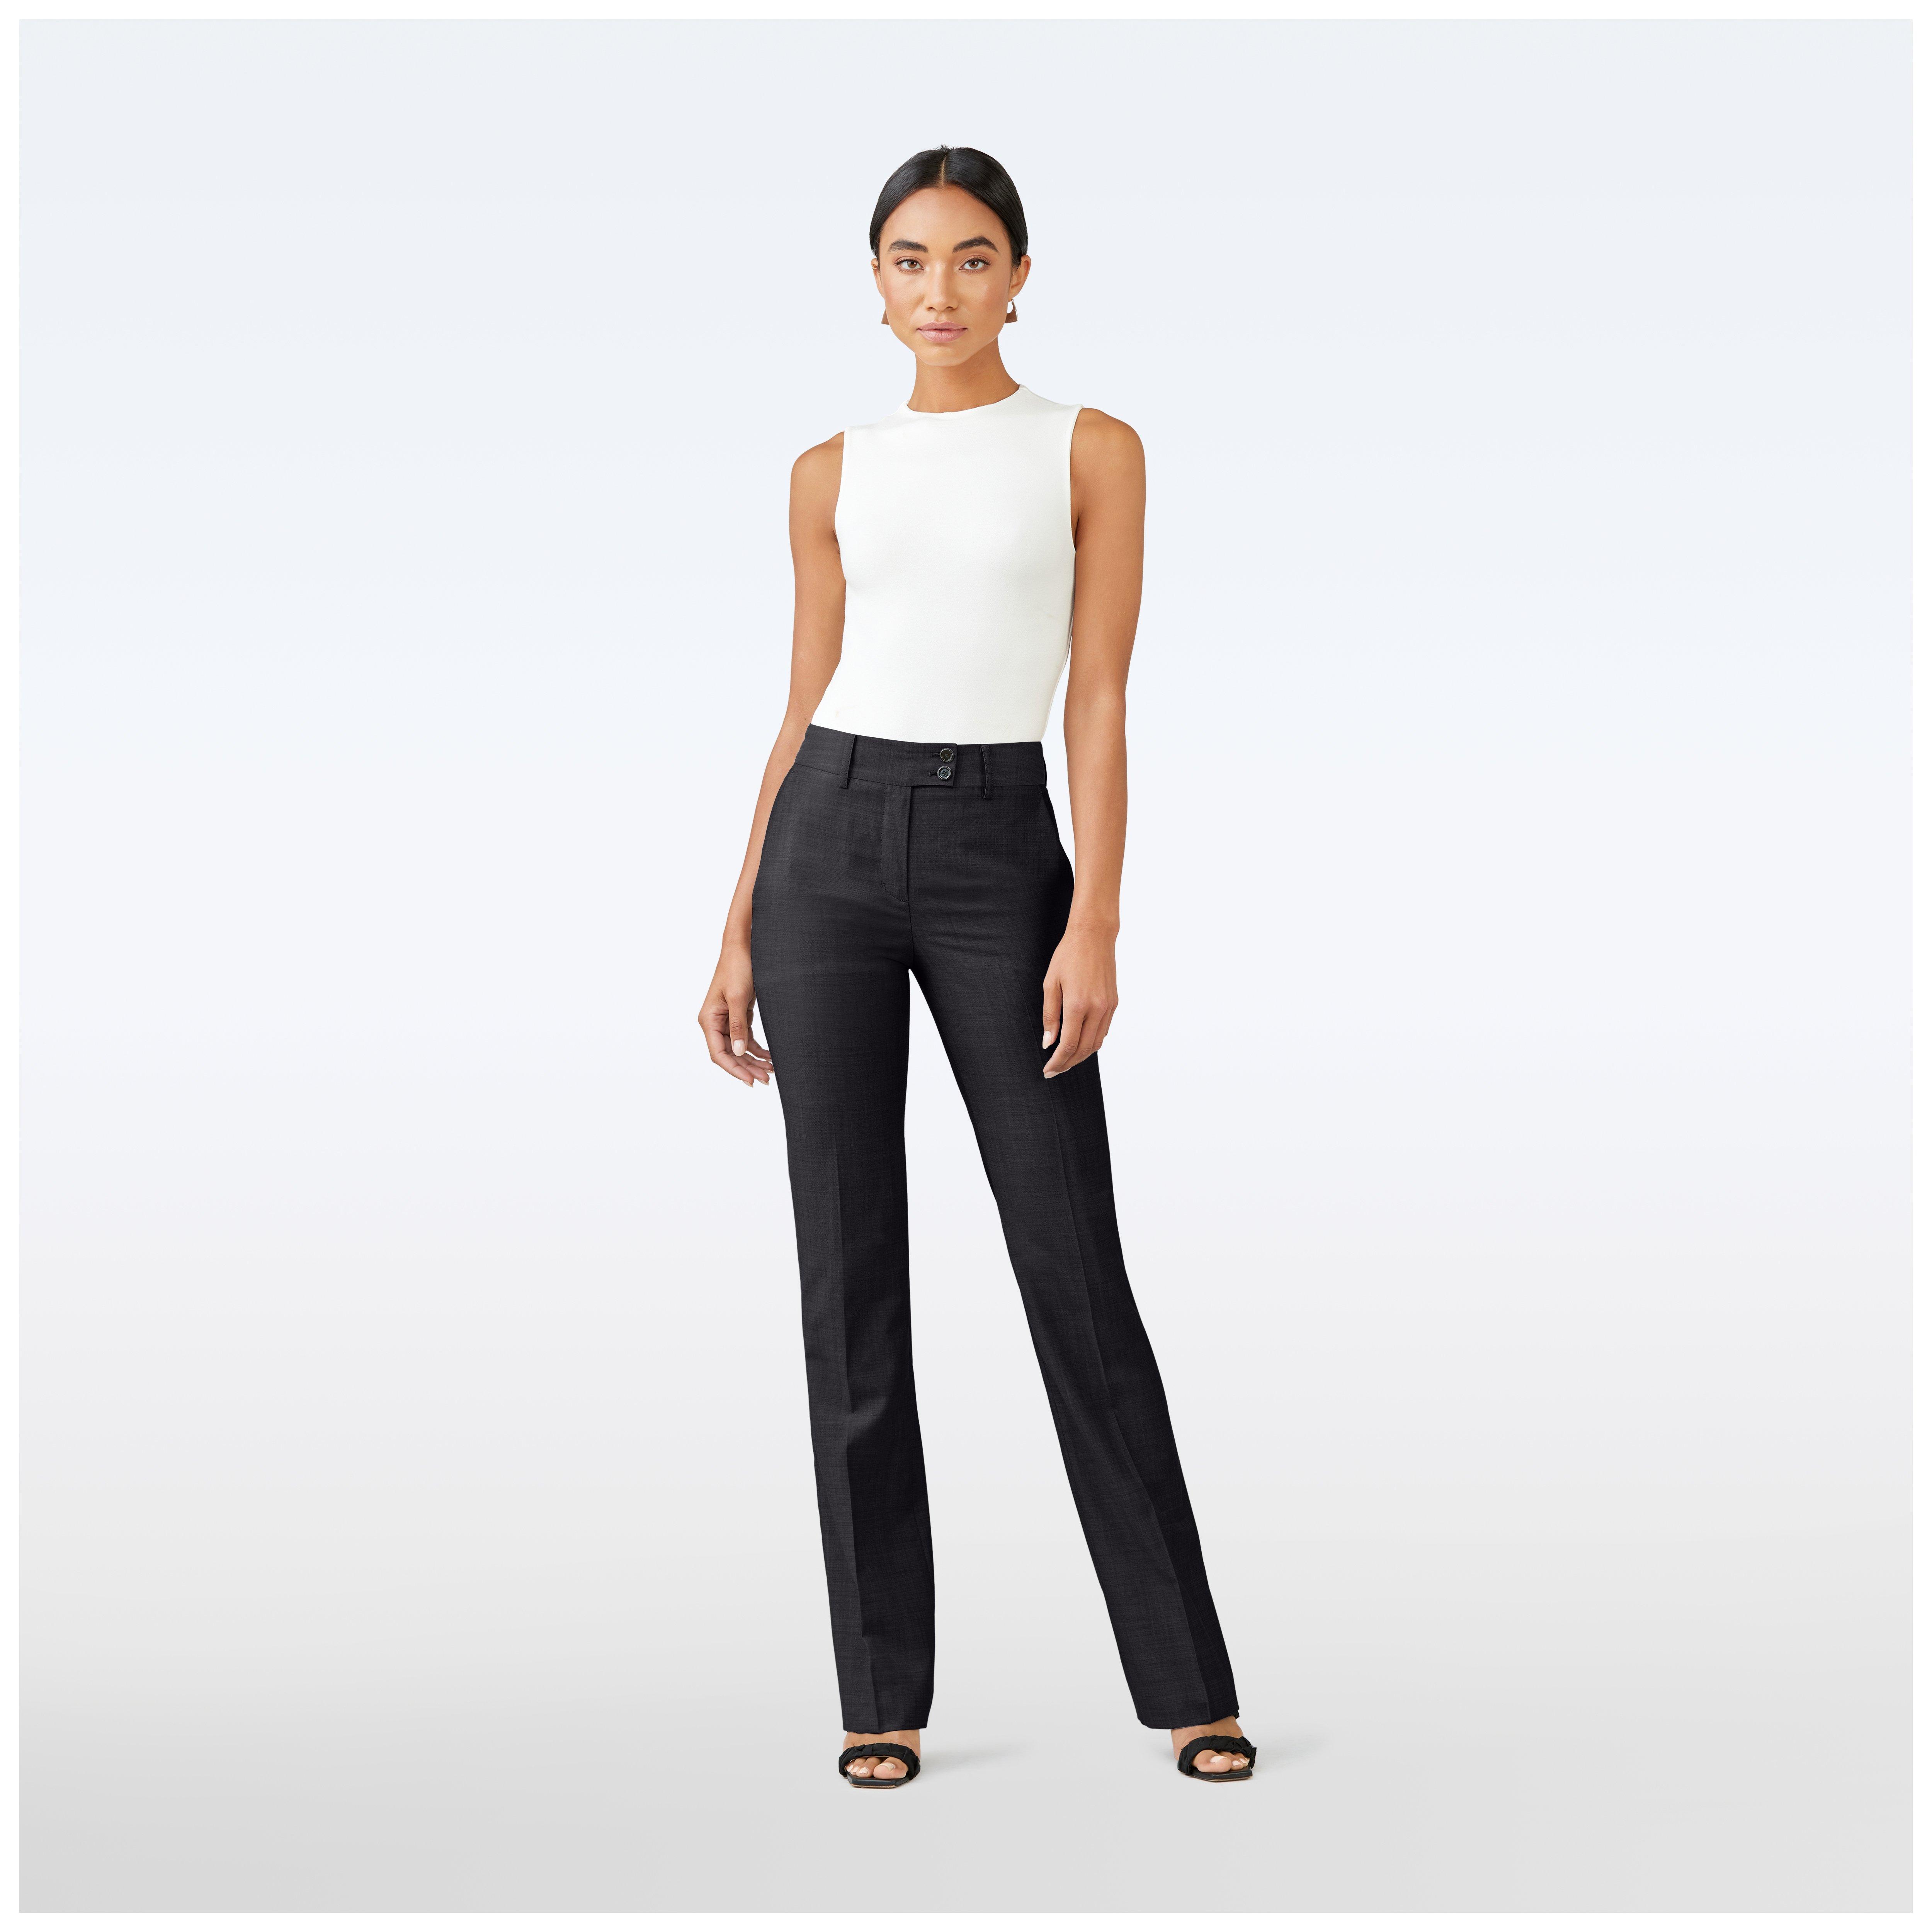 Custom Pants Made For You - Helsby Charcoal Pants Women | INDOCHINO